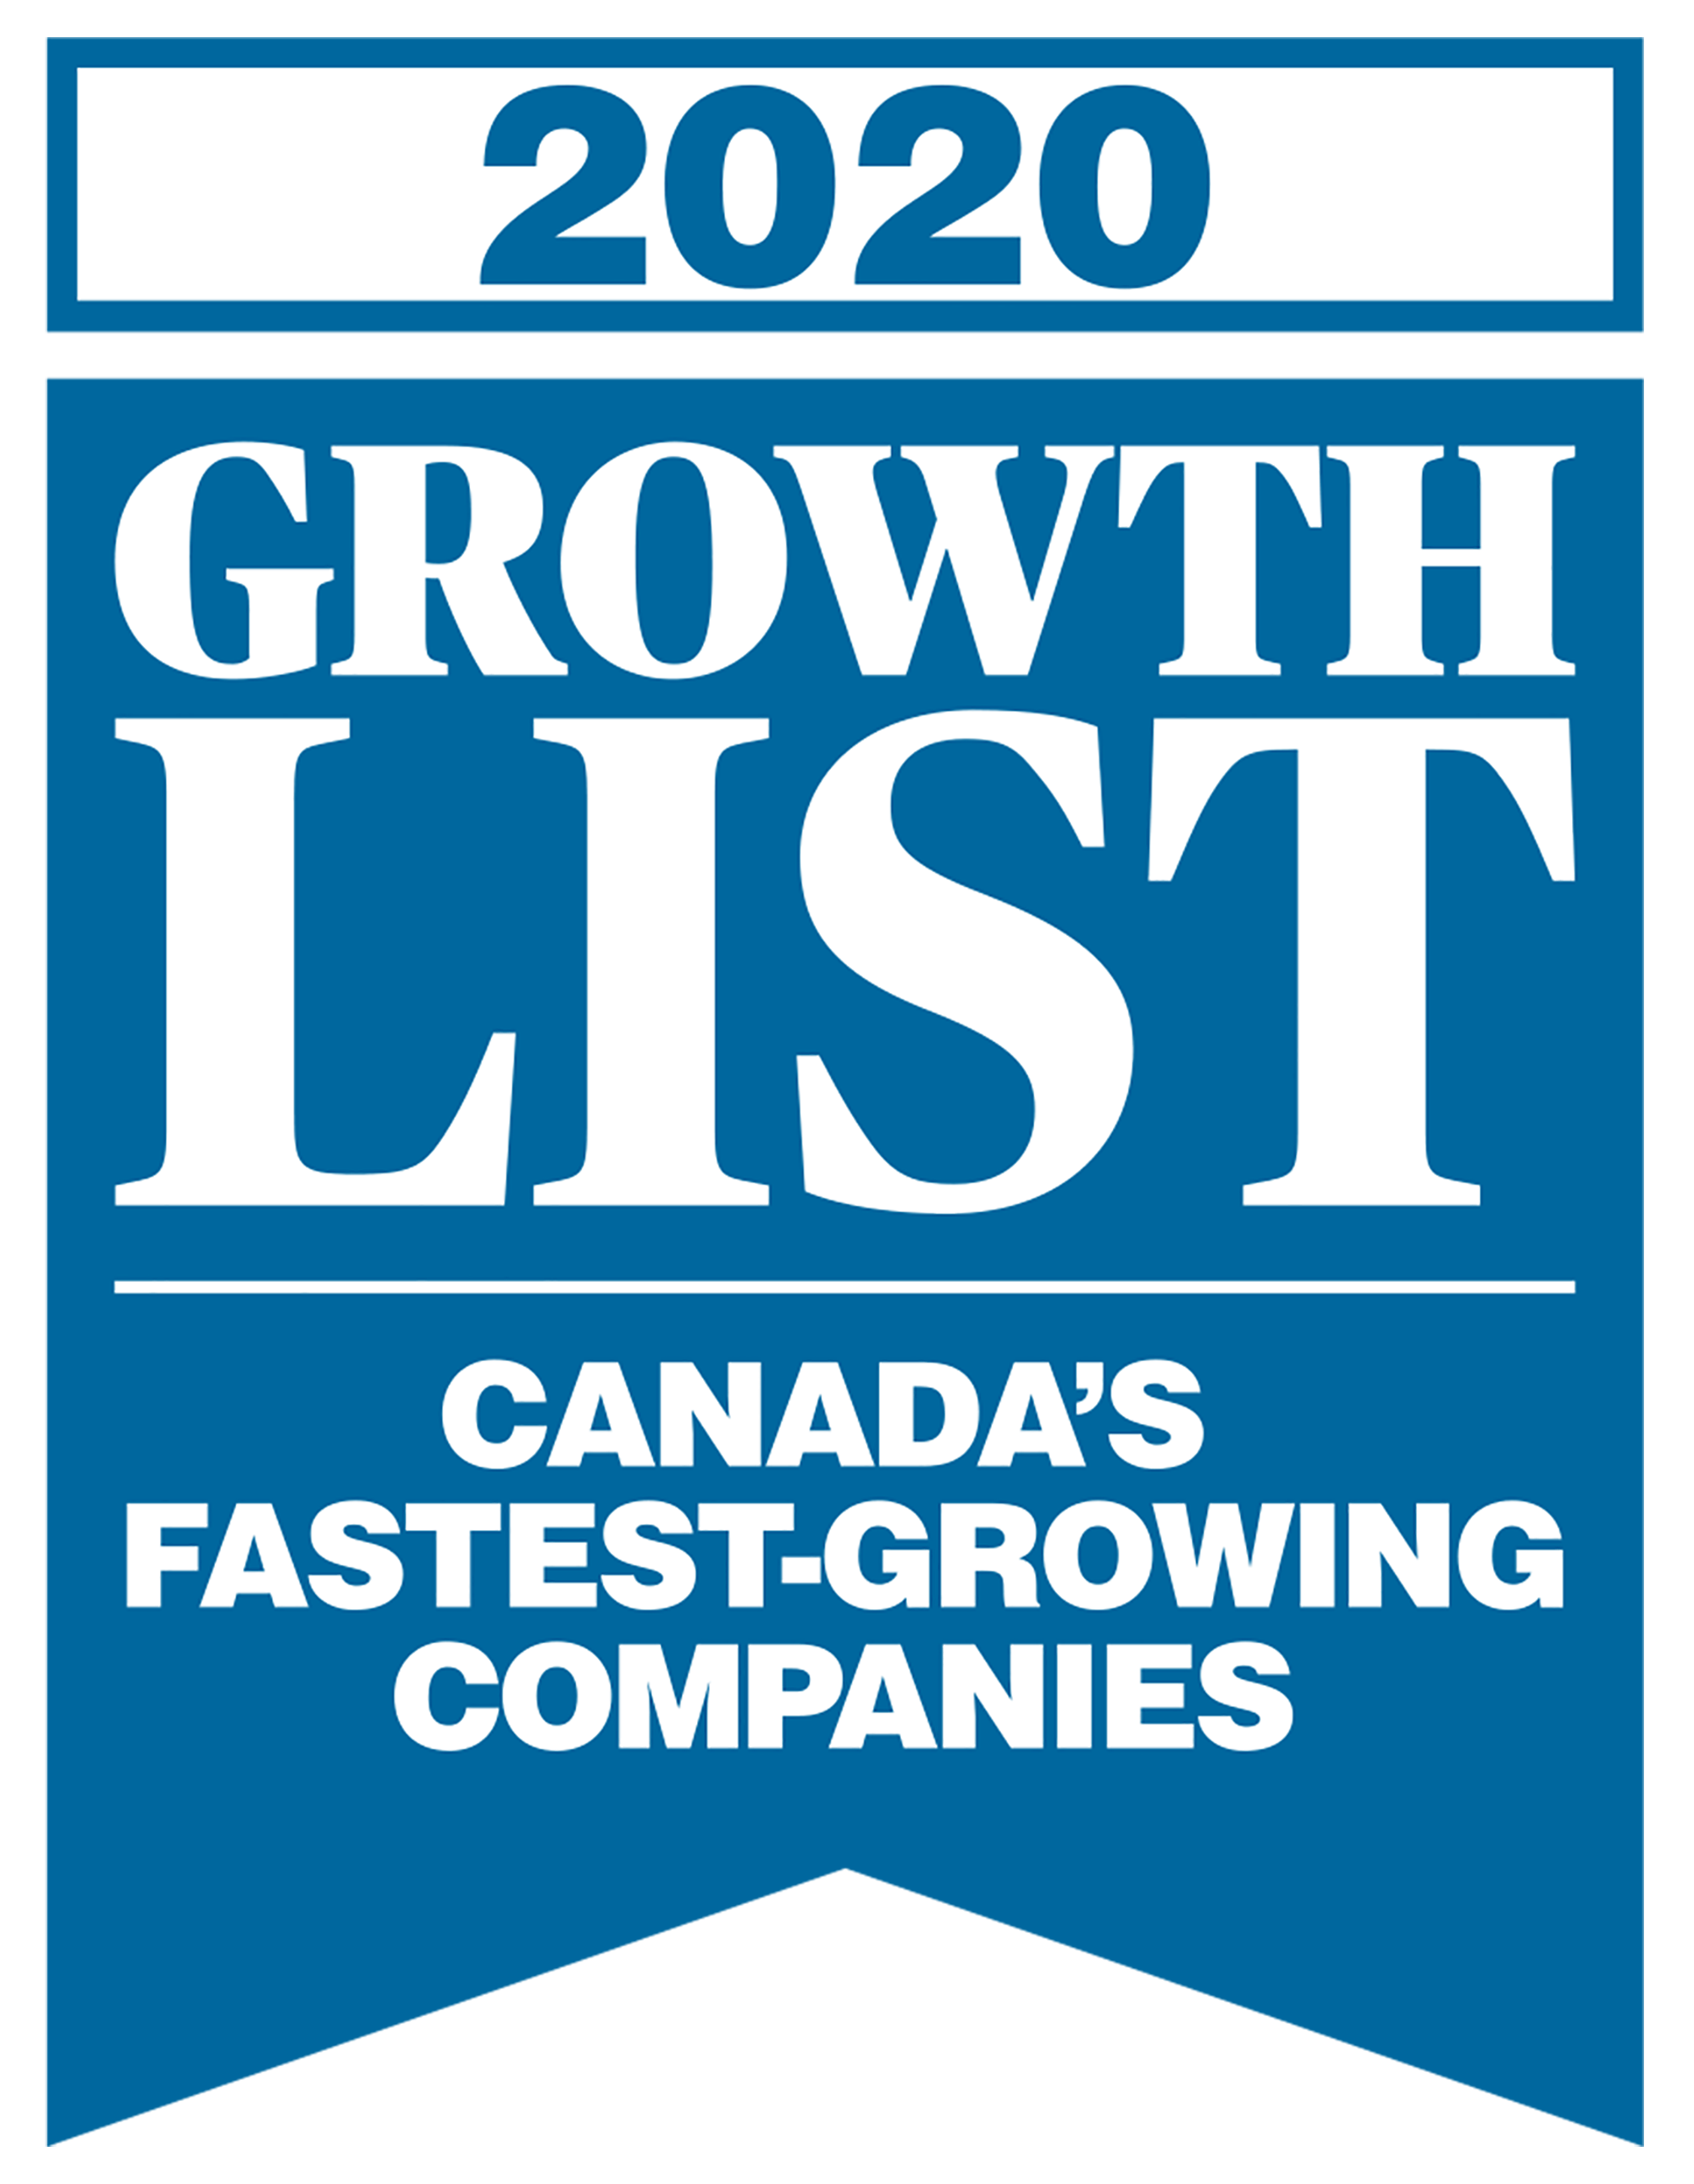 2020 growth list logo for Macleans magazine and Canadian Business magazine.